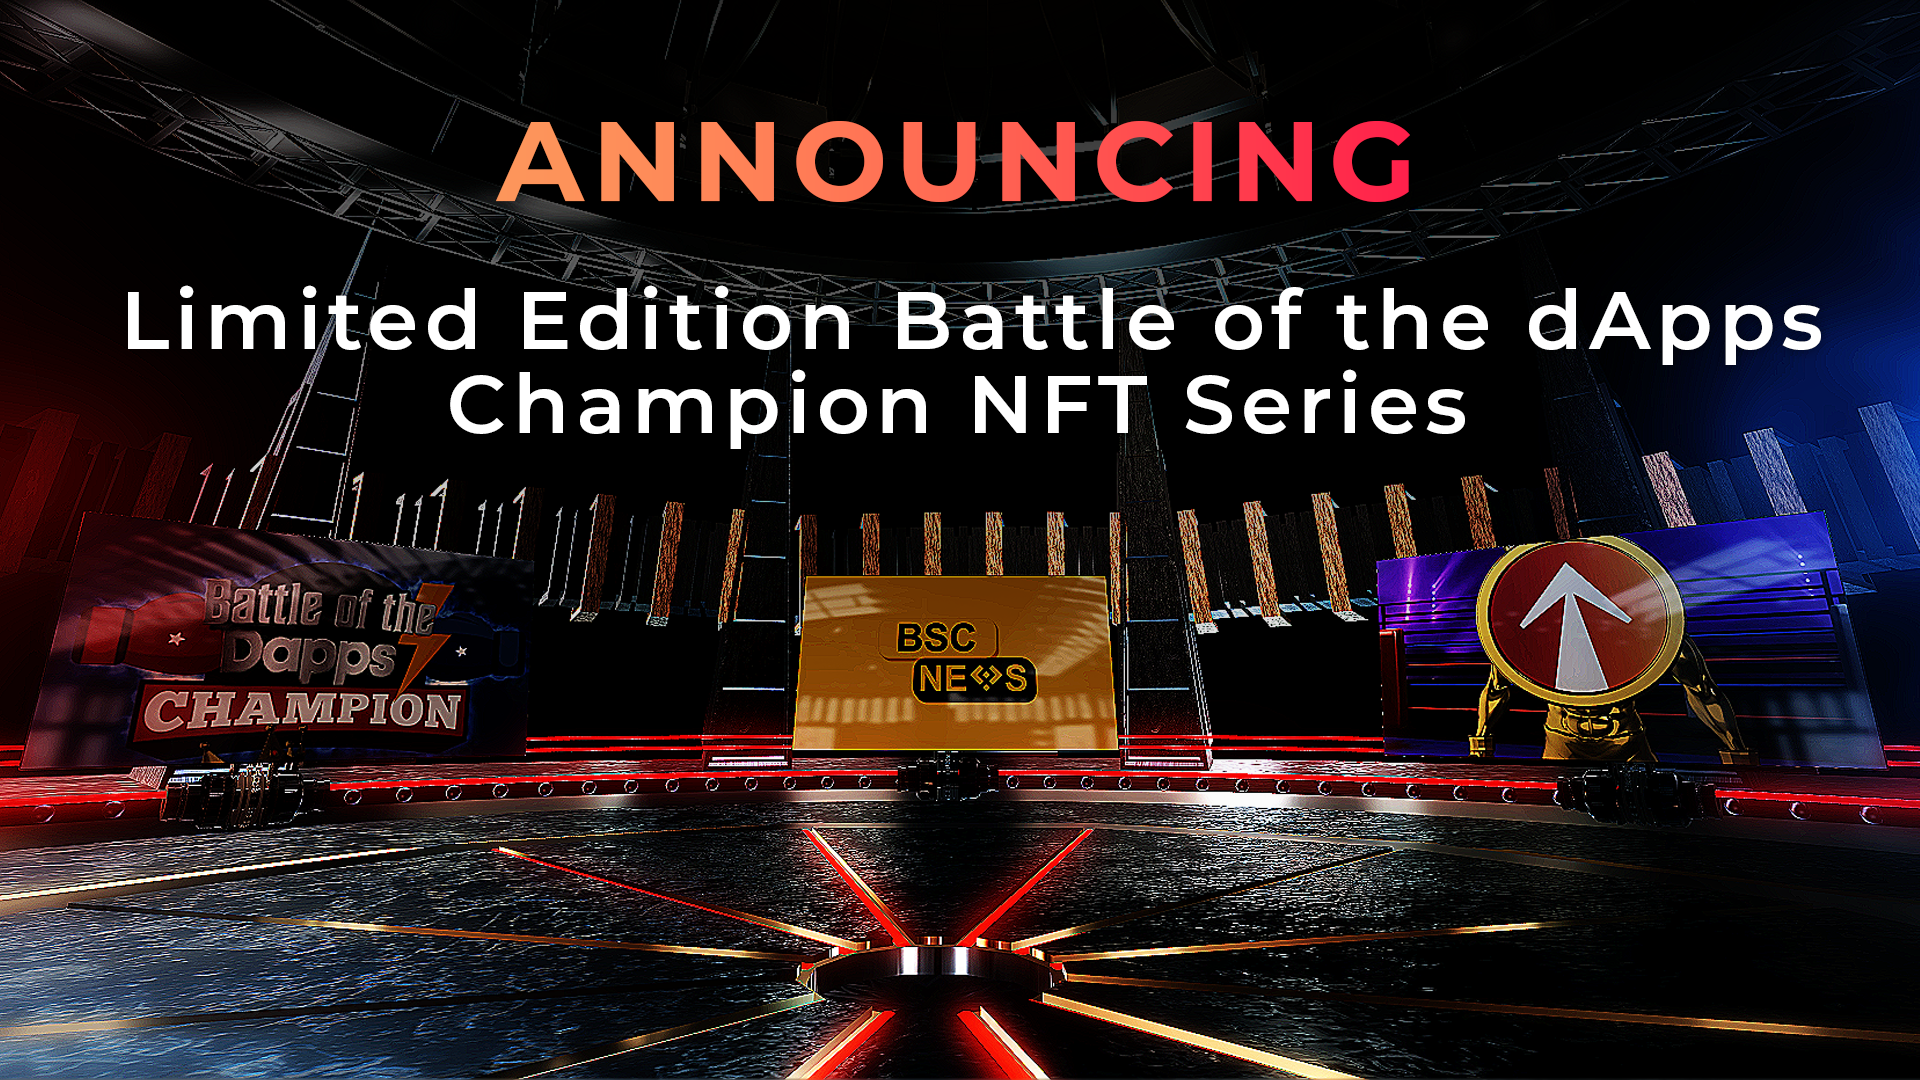 Announcing Limited Edition Battle of the dApps Champion NFT Series